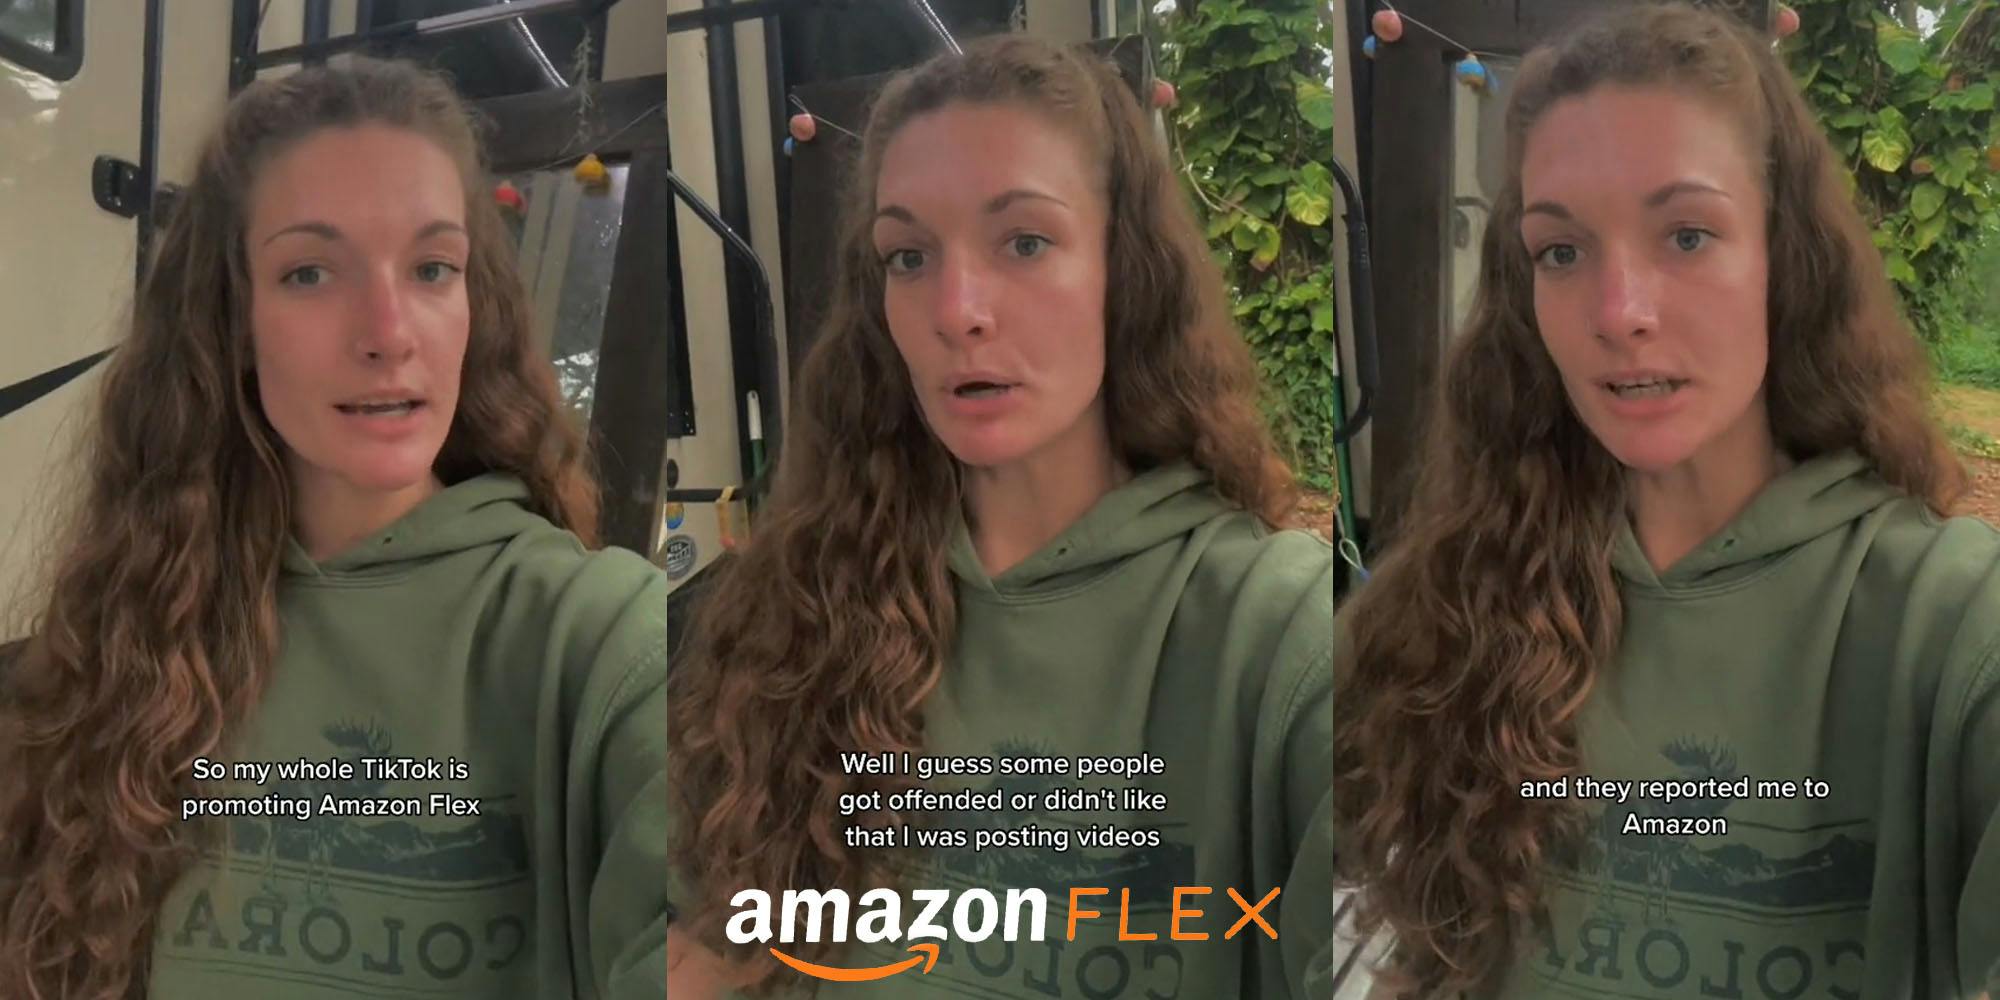 woman speaking outside caption "So my whole TikTok is promoting Amazon Flex" (l) woman speaking outside caption "Well I guess some people got offended or didn't like that I was posting videos" with Amazon Flex logo centered at bottom (c) woman speaking outside caption "and they reported me to Amazon" (r)